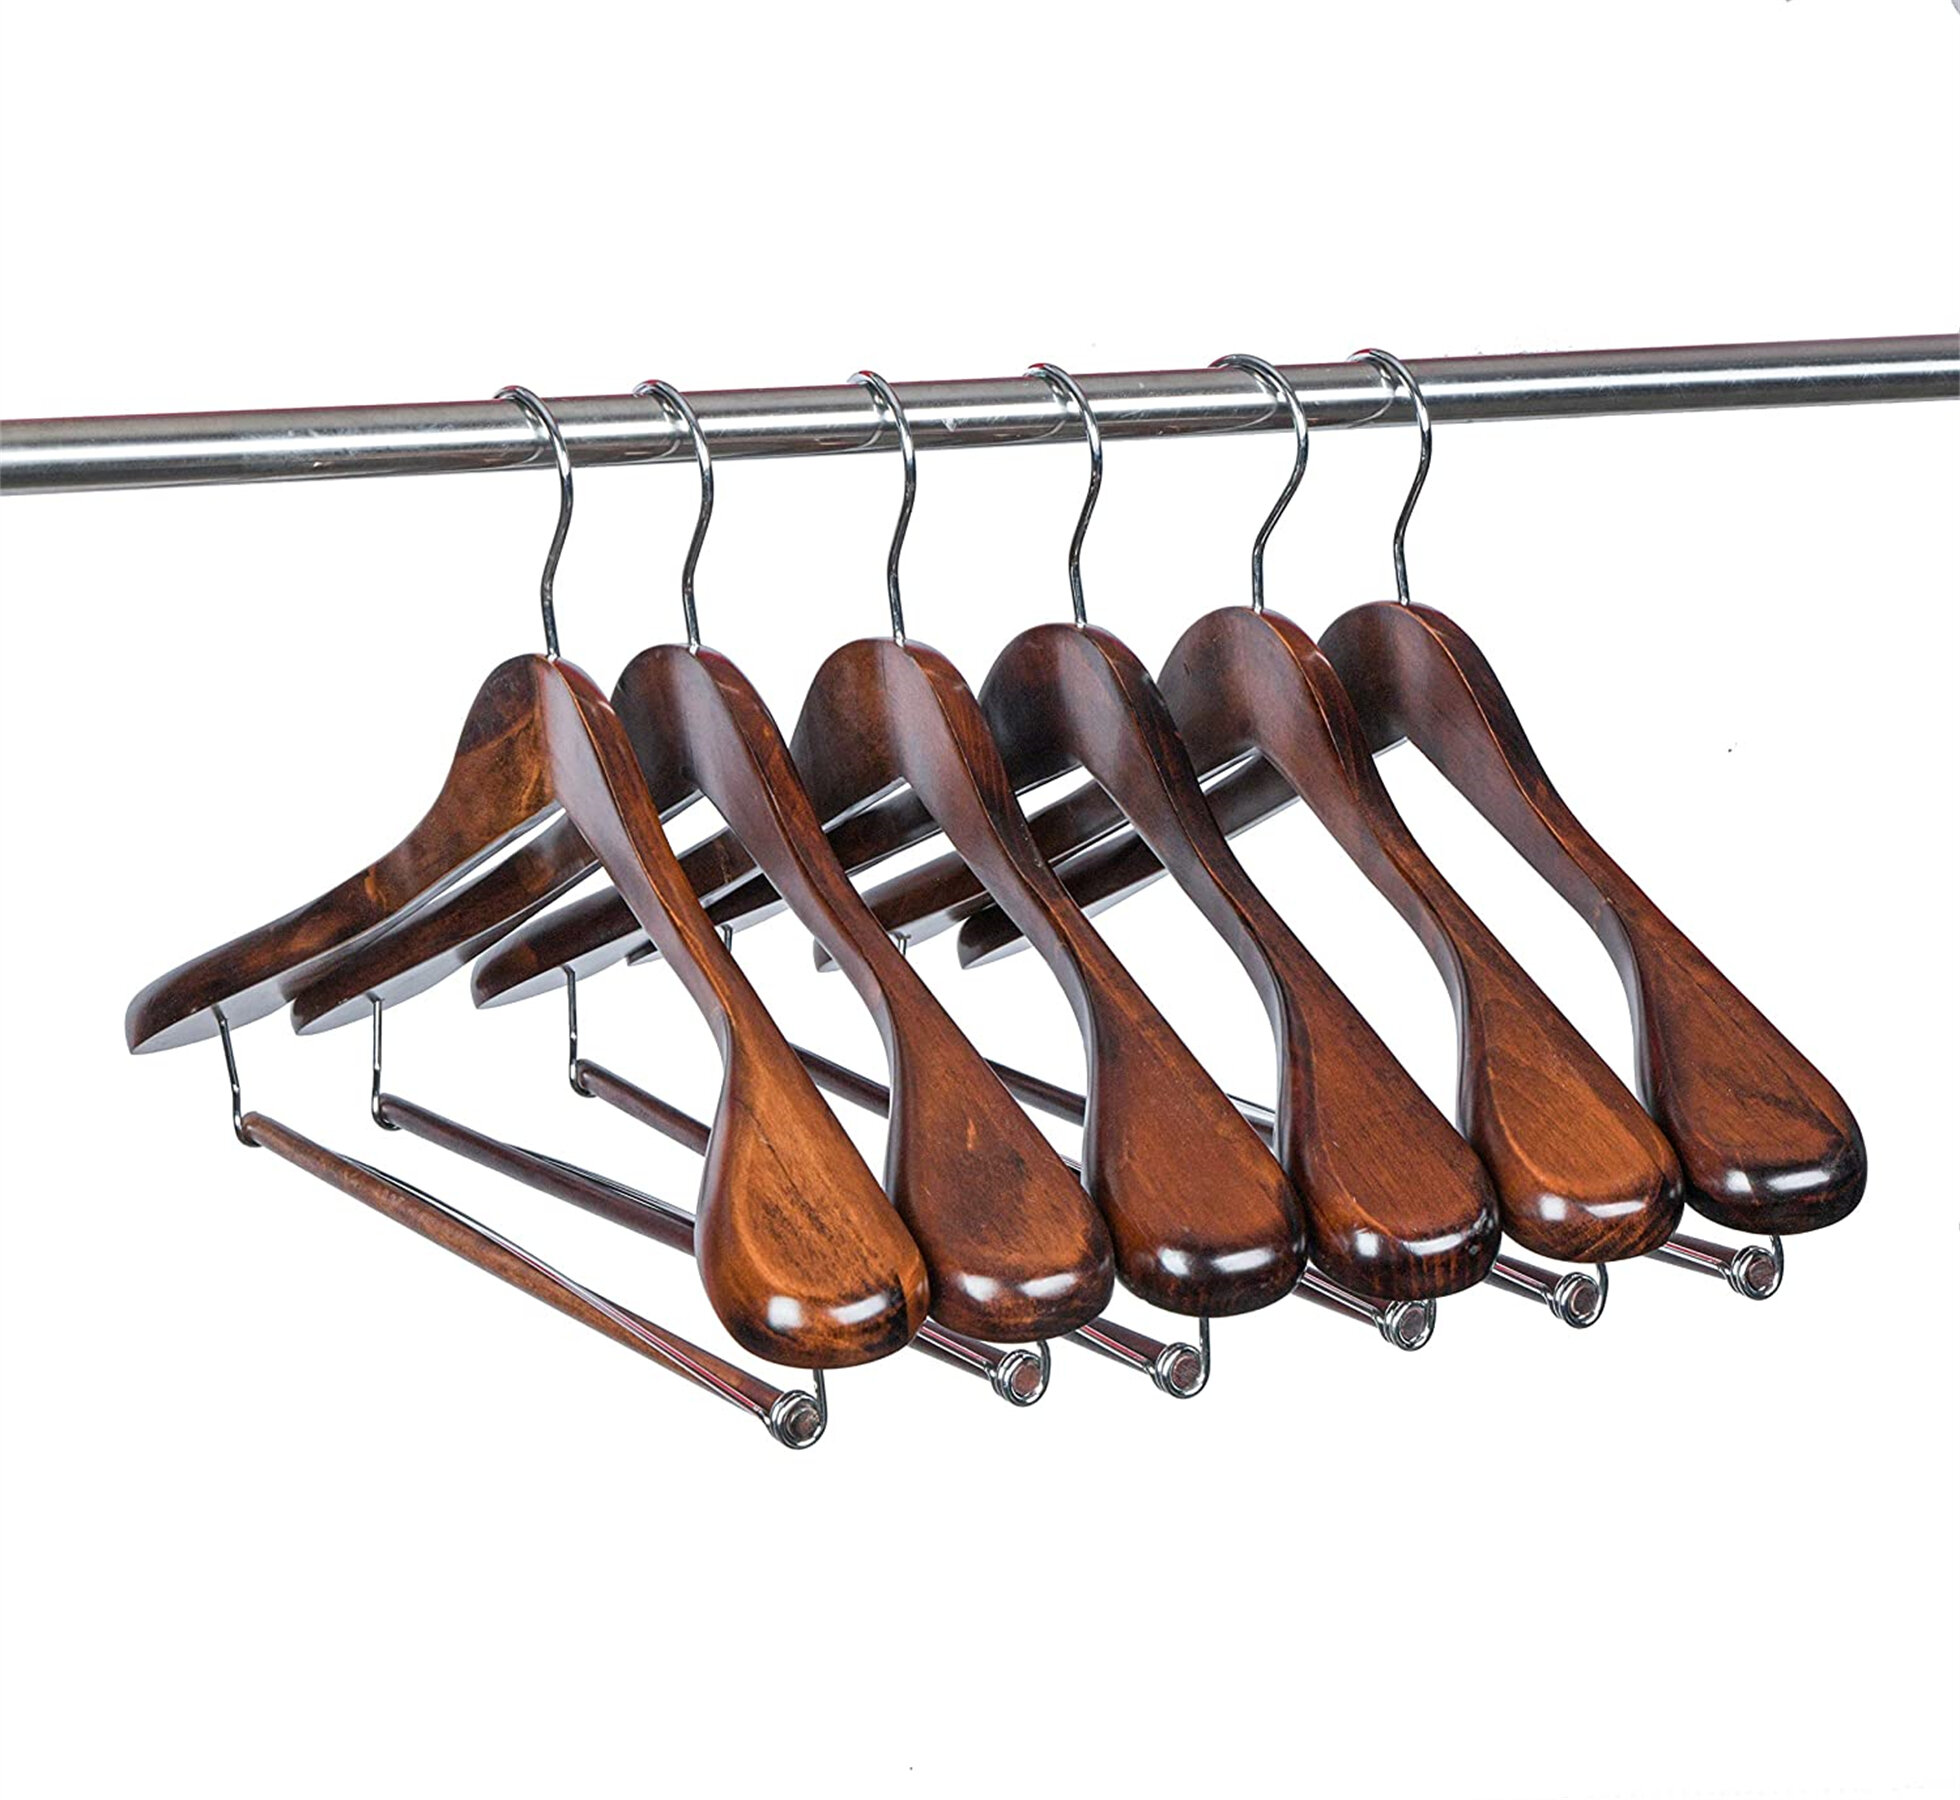 Quality Luxury Curved Wooden Suit Hangers Wide Wood Hanger for Coats and Pants with Velvet Bar Mahogany Finish 2